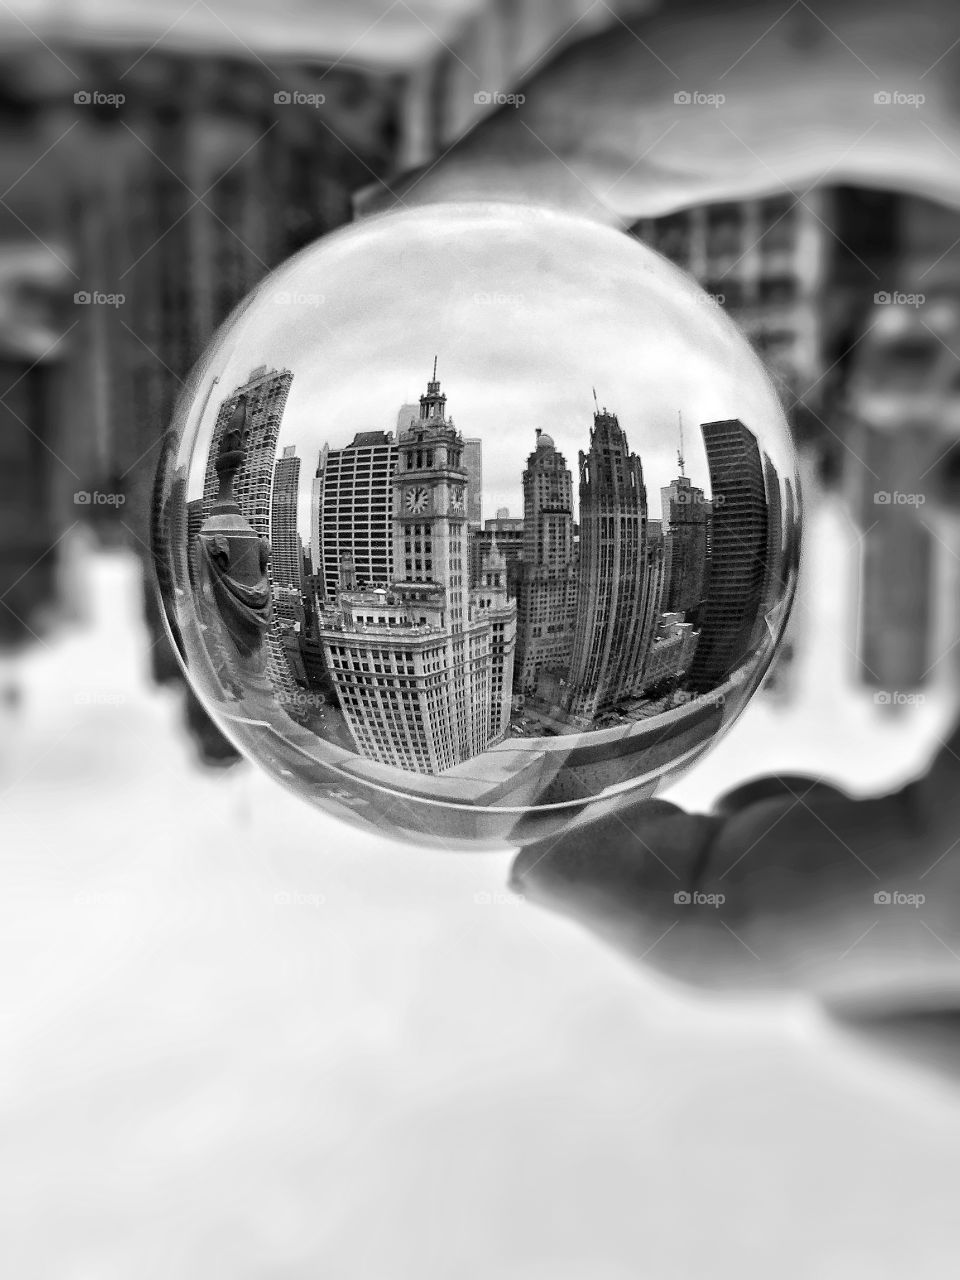 Reflection of the City of Chicago in a crystal ball black and white